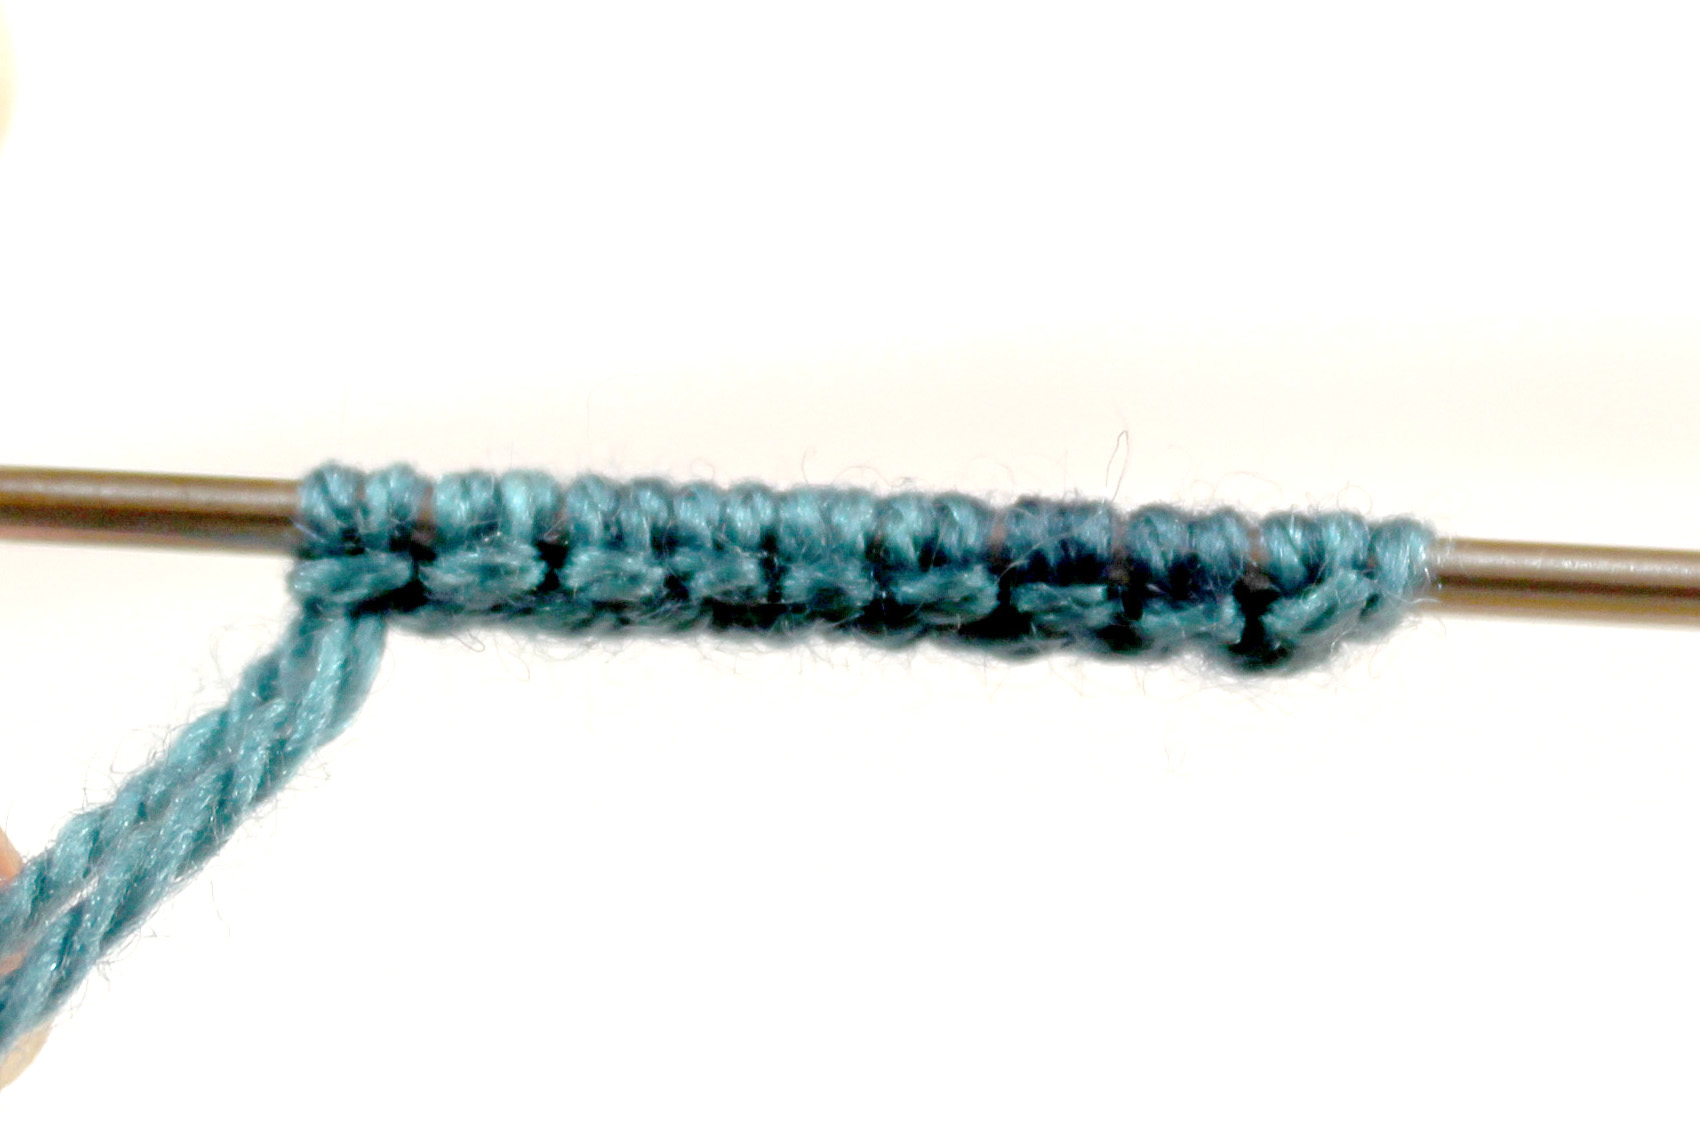 A cast-on on a needle with stitches arranged in pairs with a horizontal band of yarn wrapped around them.